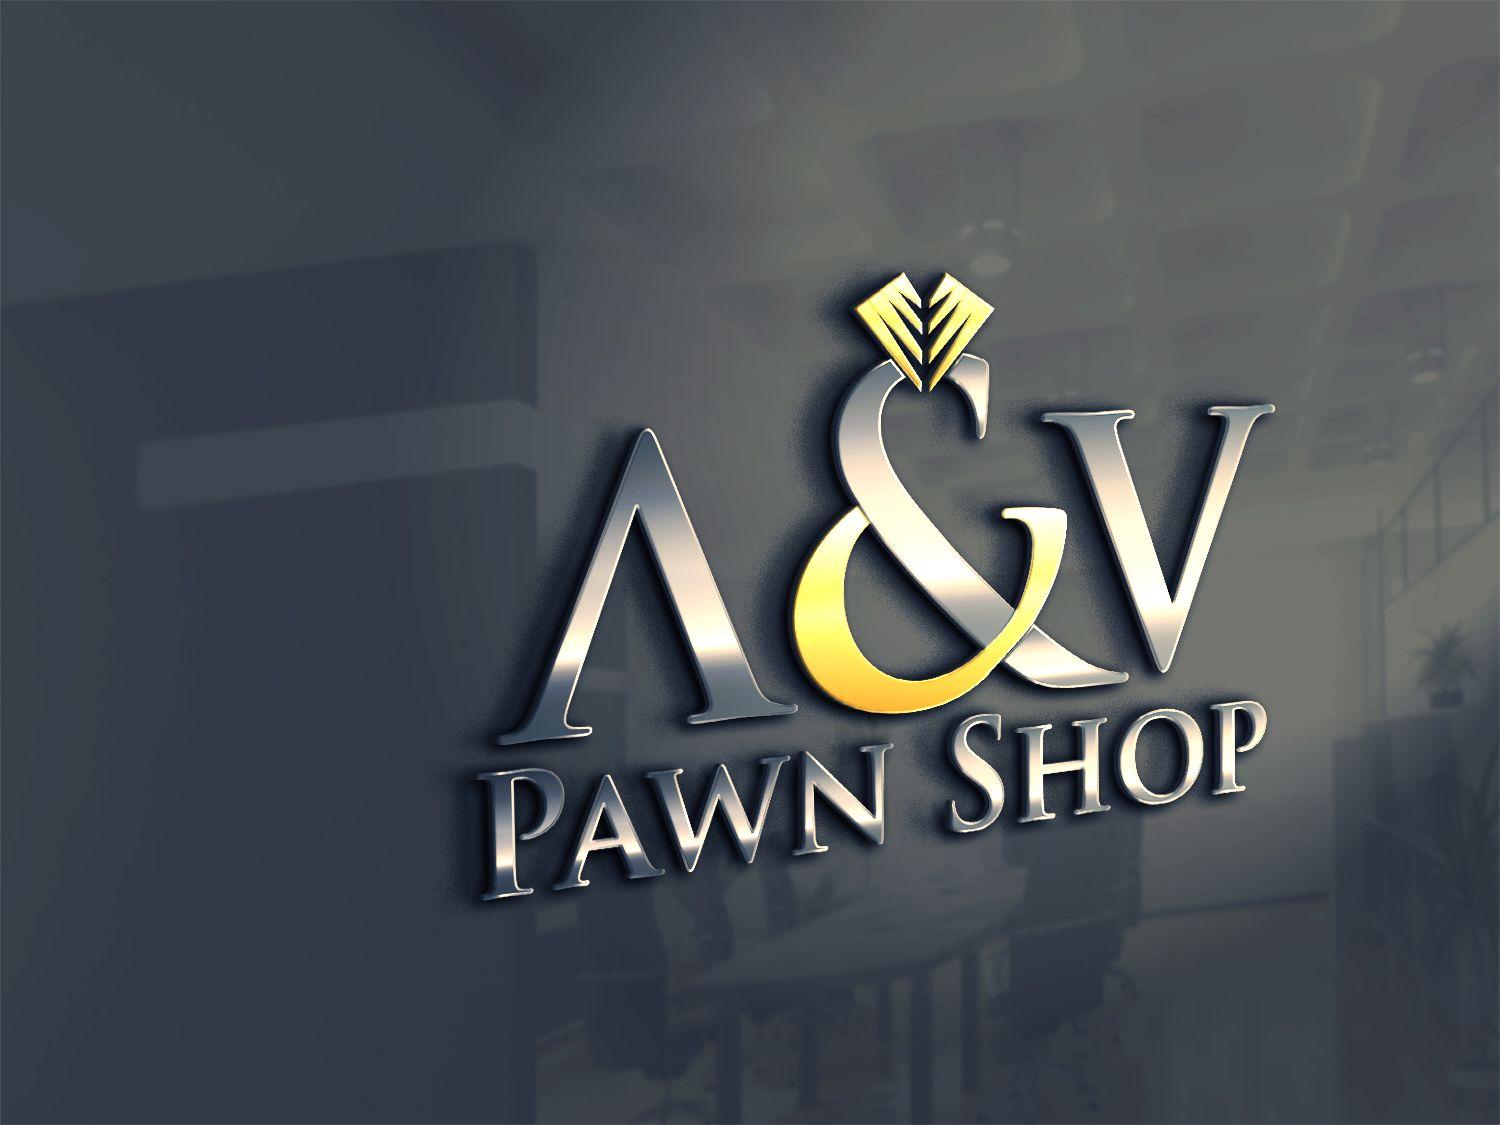 Professional Business Logo - Modern, Professional, Business Logo Design for A&V Pawn by StormWar ...